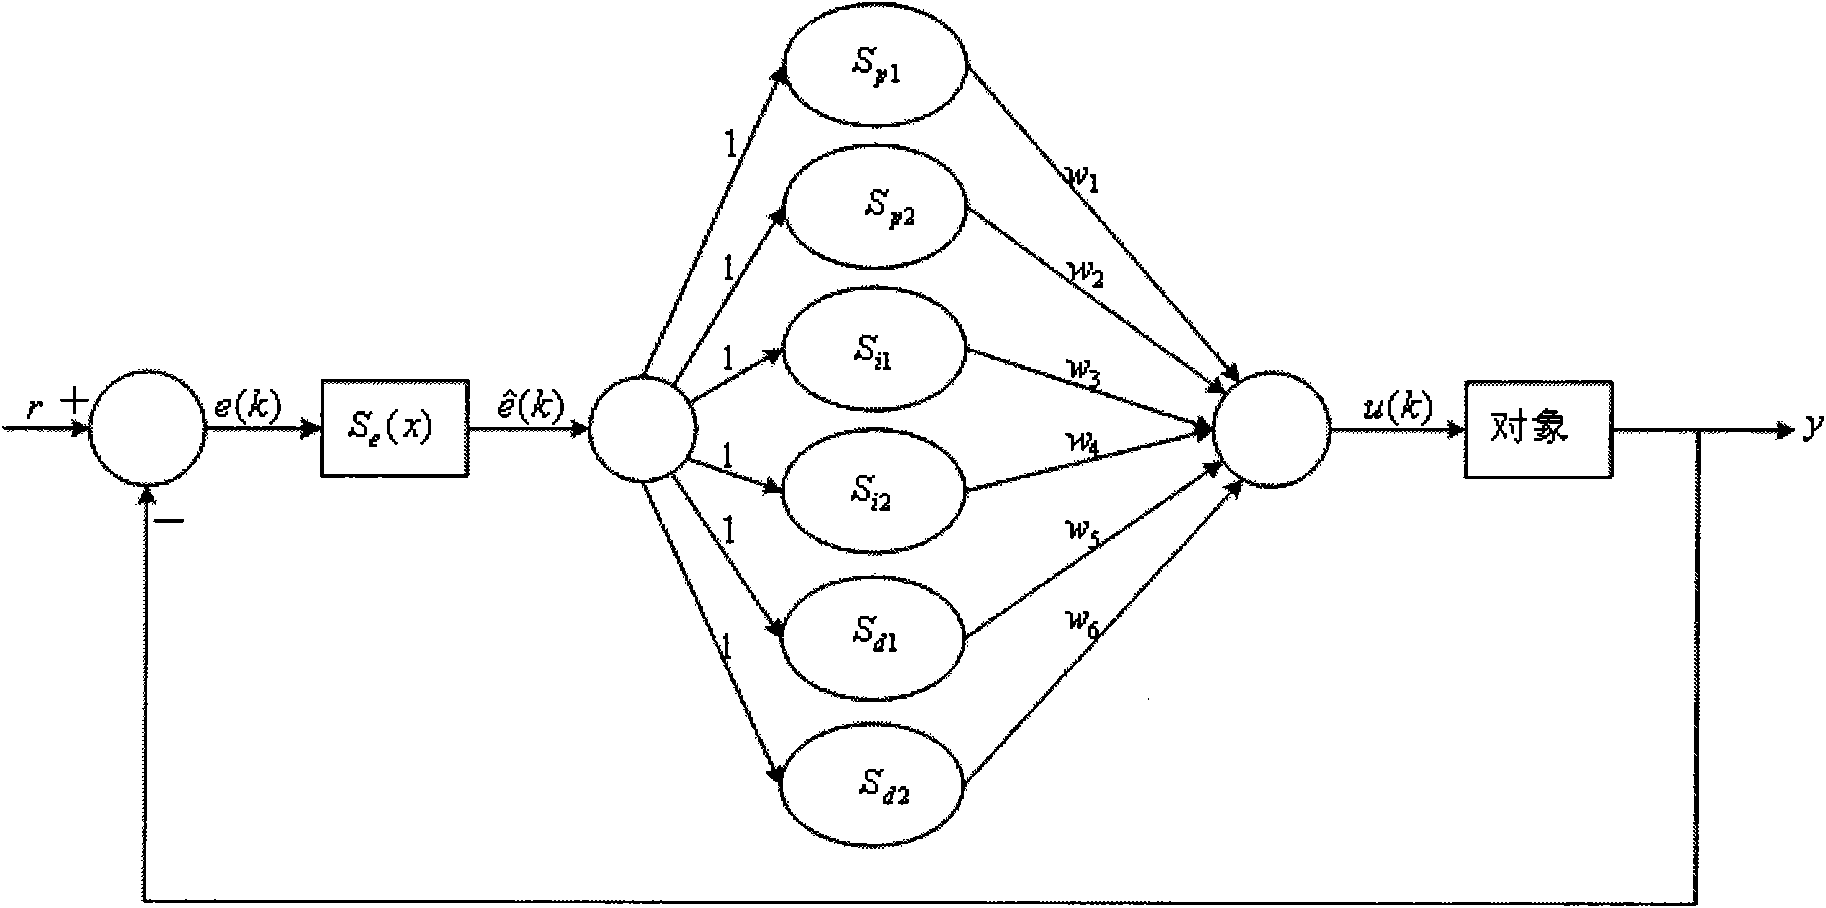 Composite PID (Proportion Integration Differentiation) neural network control method based on nonlinear dynamic factor